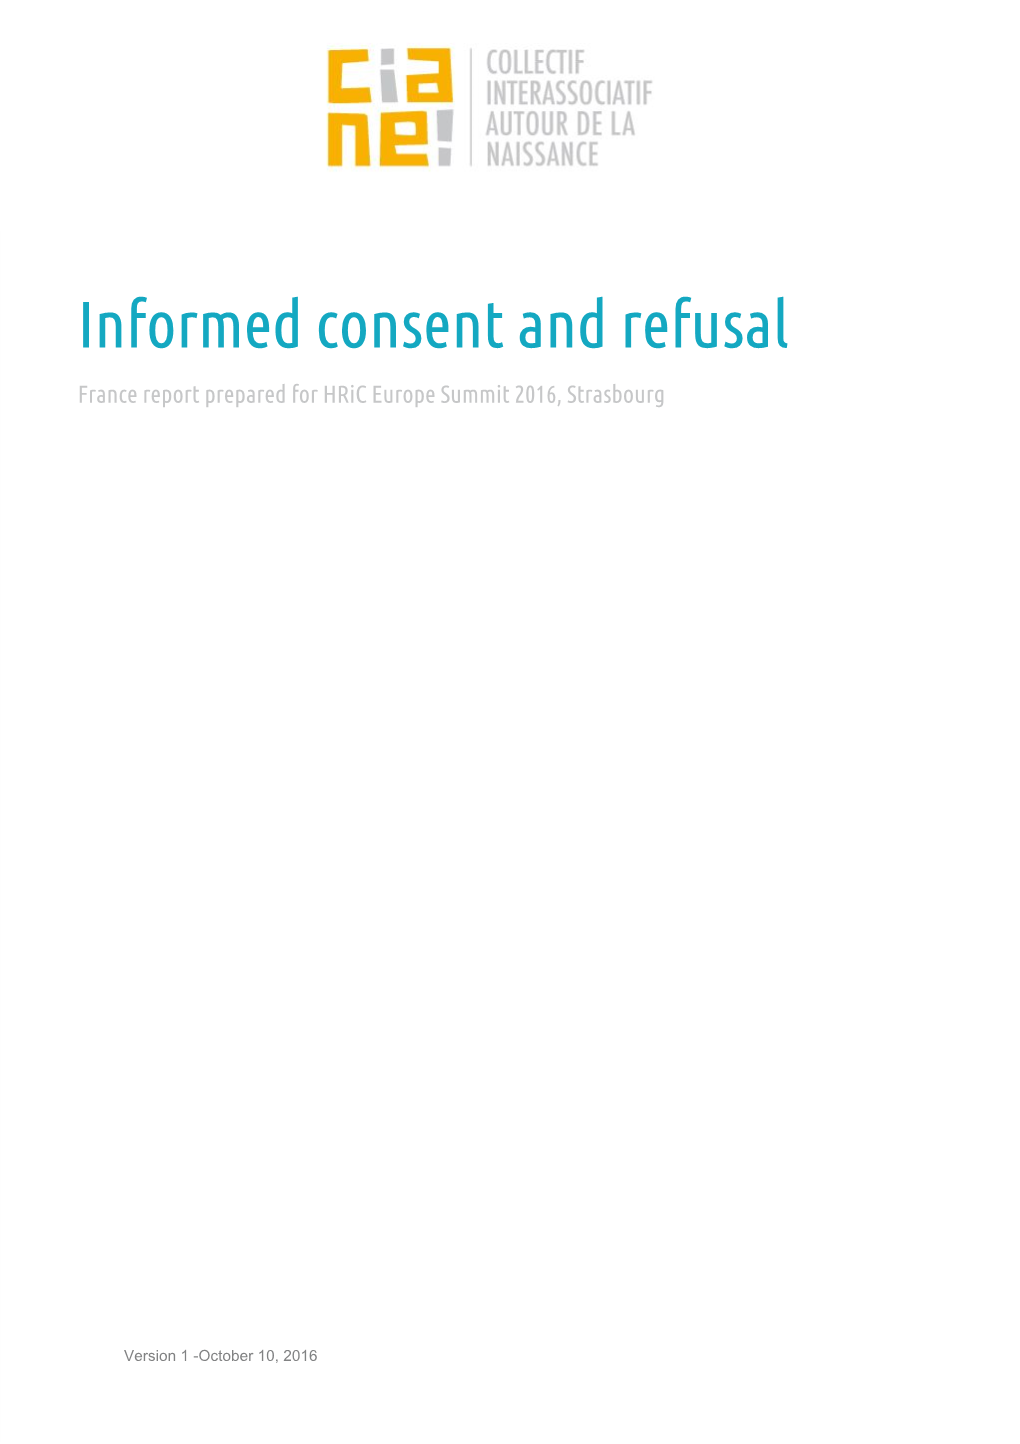 Informed Consent and Refusal France Report Prepared for Hric Europe Summit 2016, Strasbourg